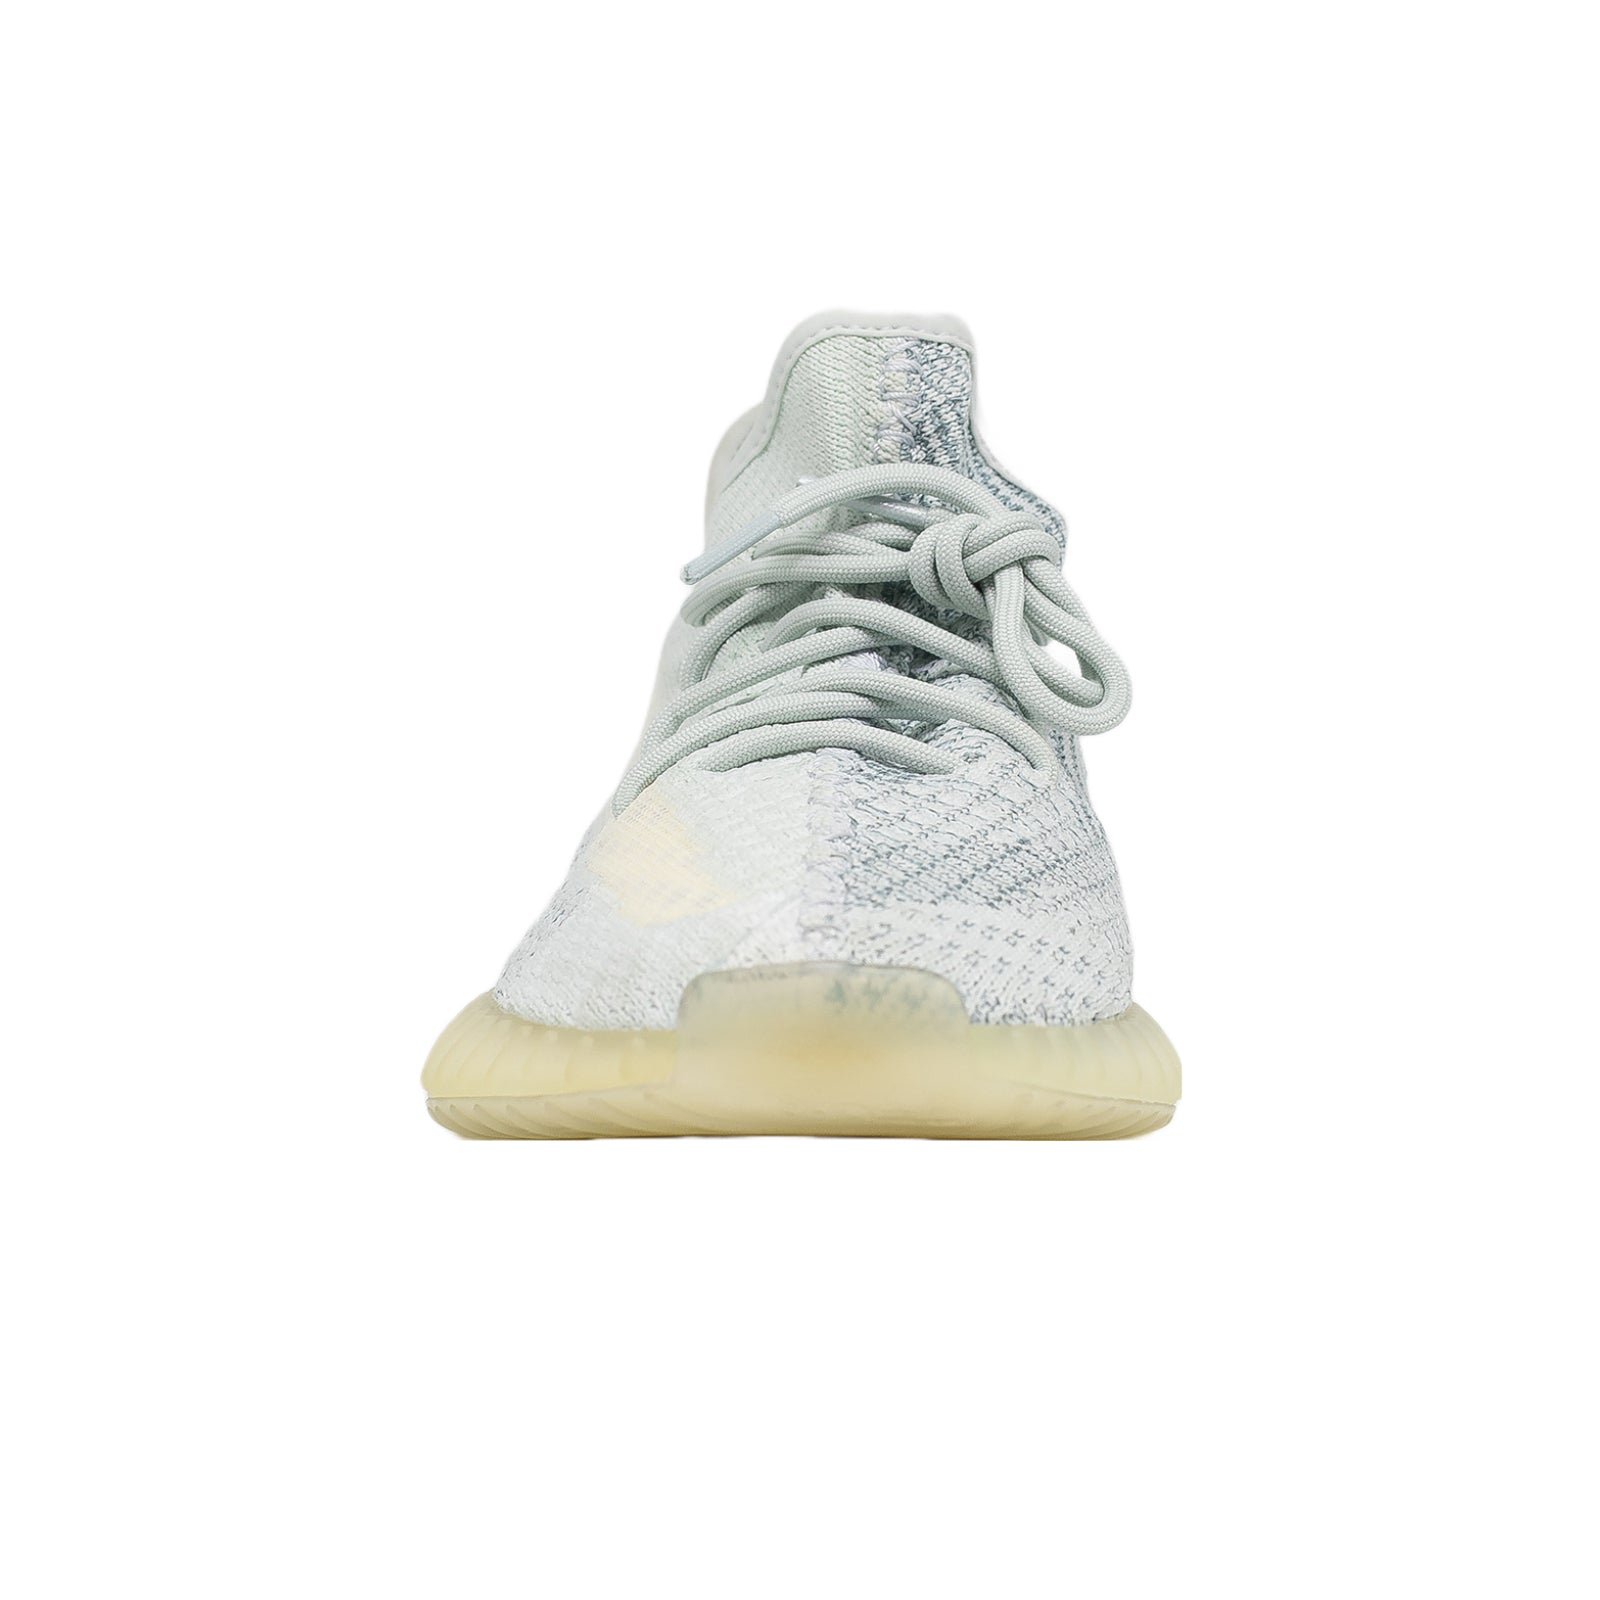 Yeezy Boost 350 V2, Cloud White (Reflective)